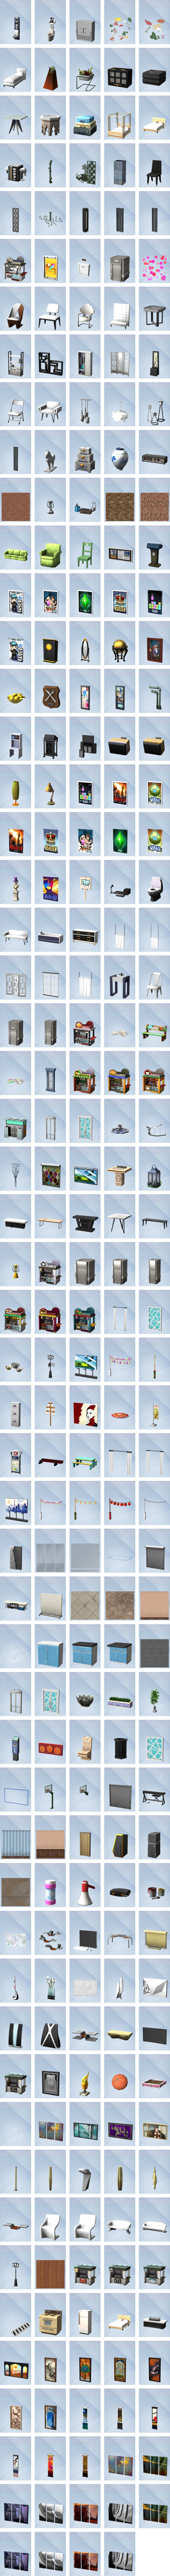 The Sims 4 City Living objects